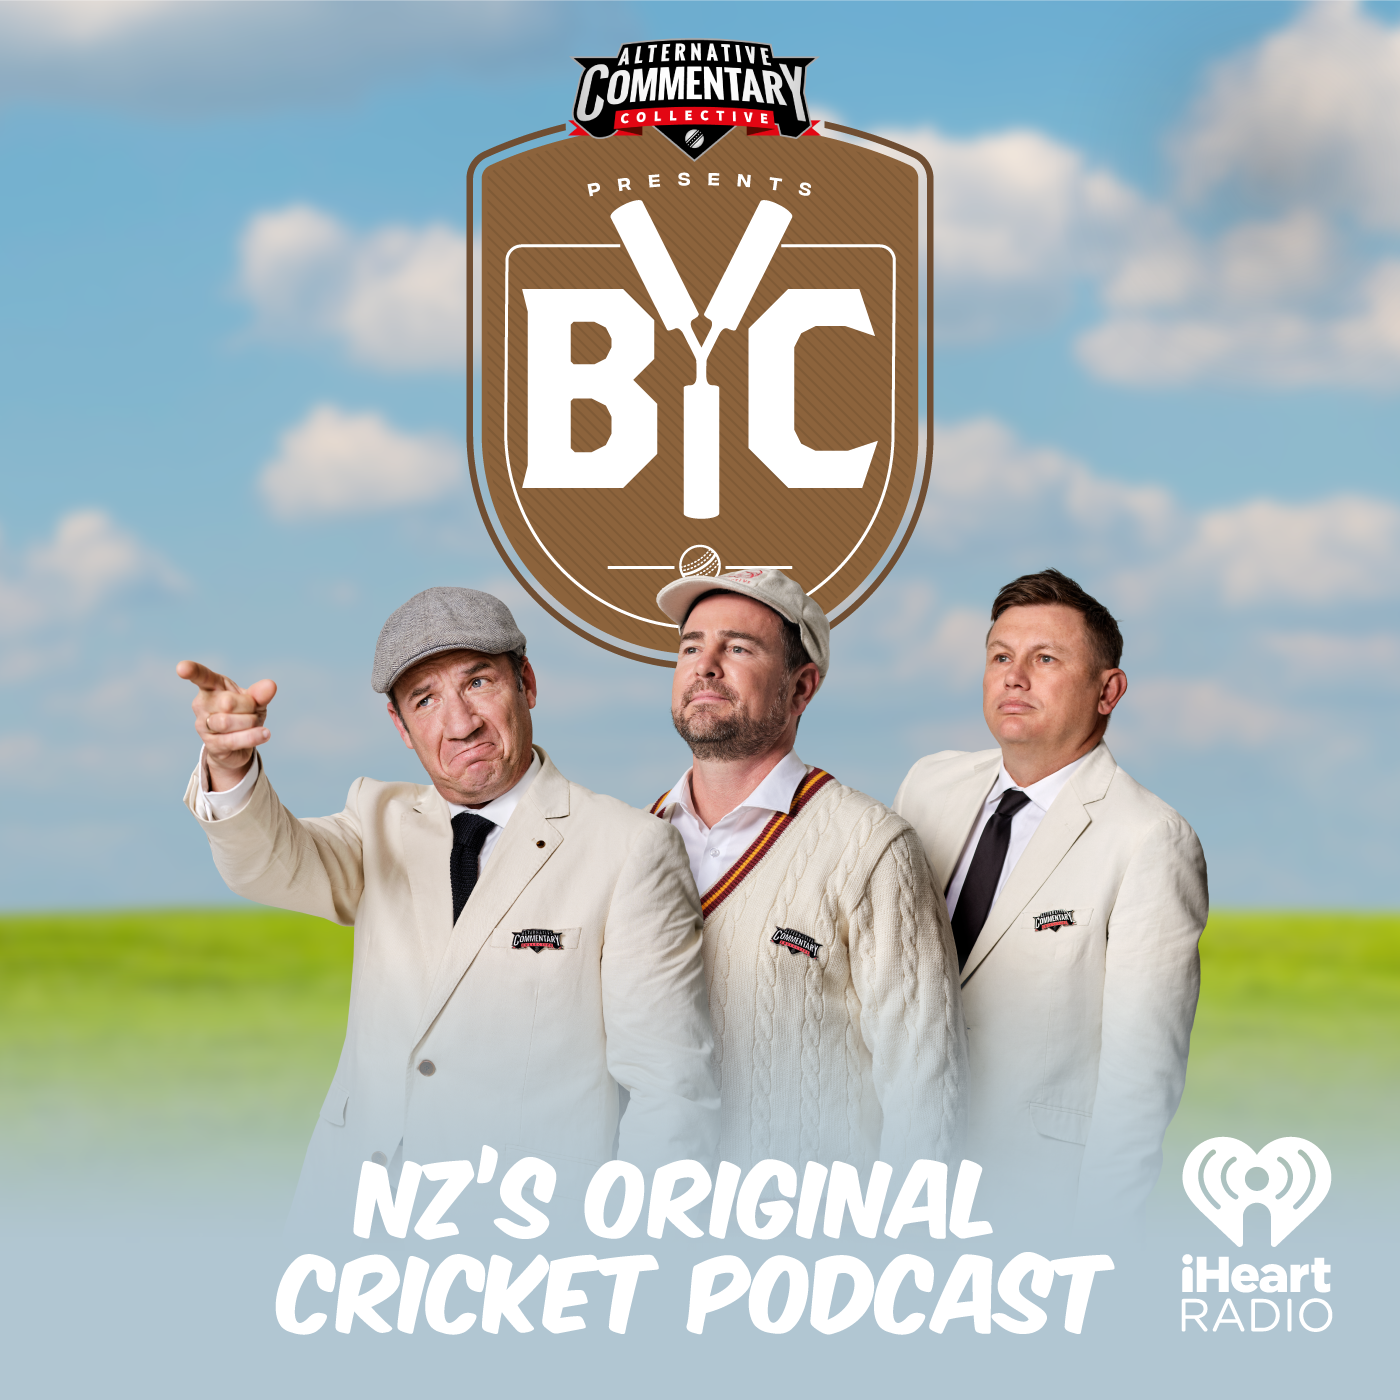 "The Ashes: 1st Test Review"